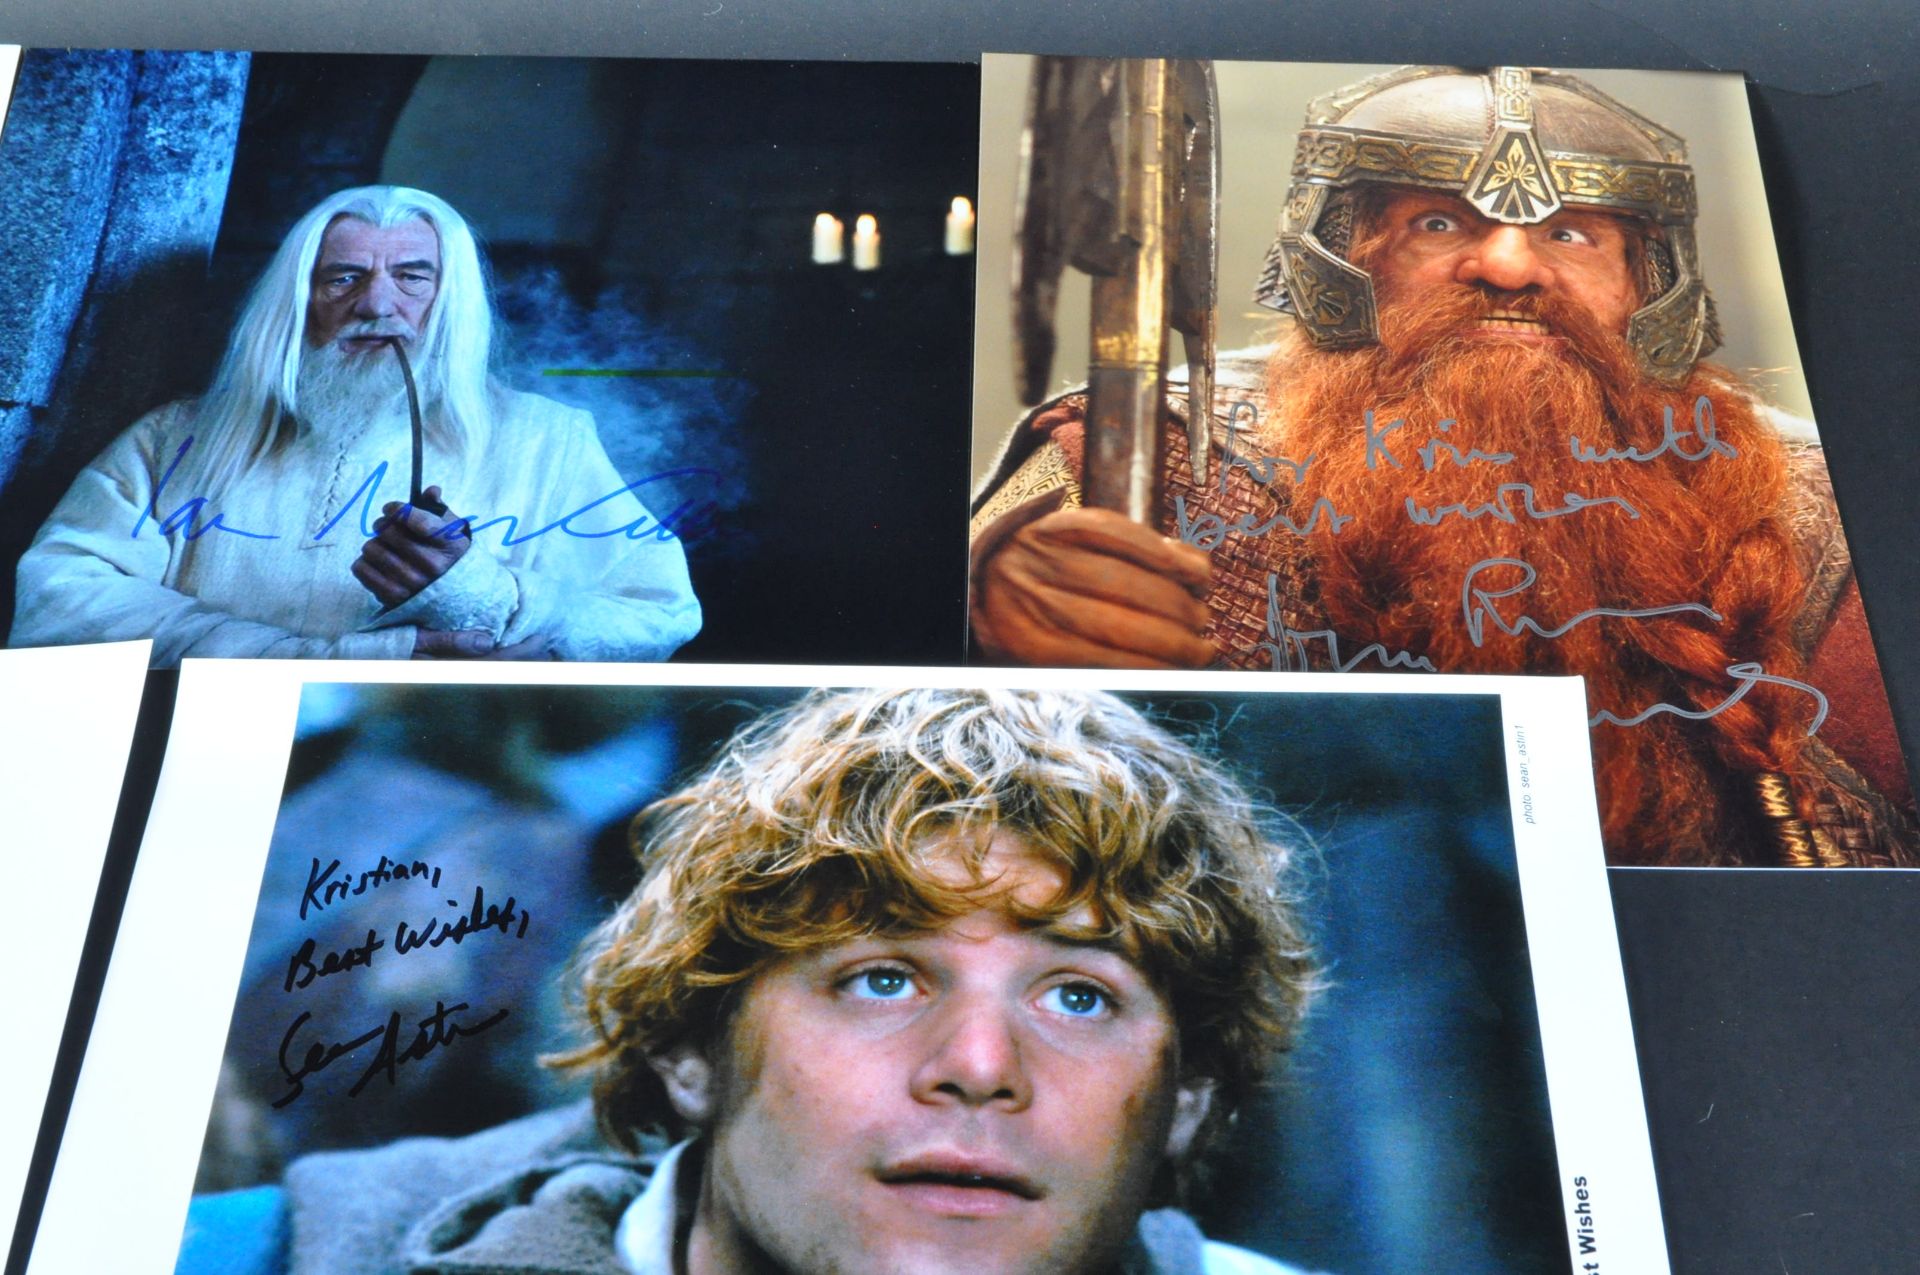 THE LORD OF THE RINGS - MAIN CAST AUTOGRAPHS - Image 3 of 3